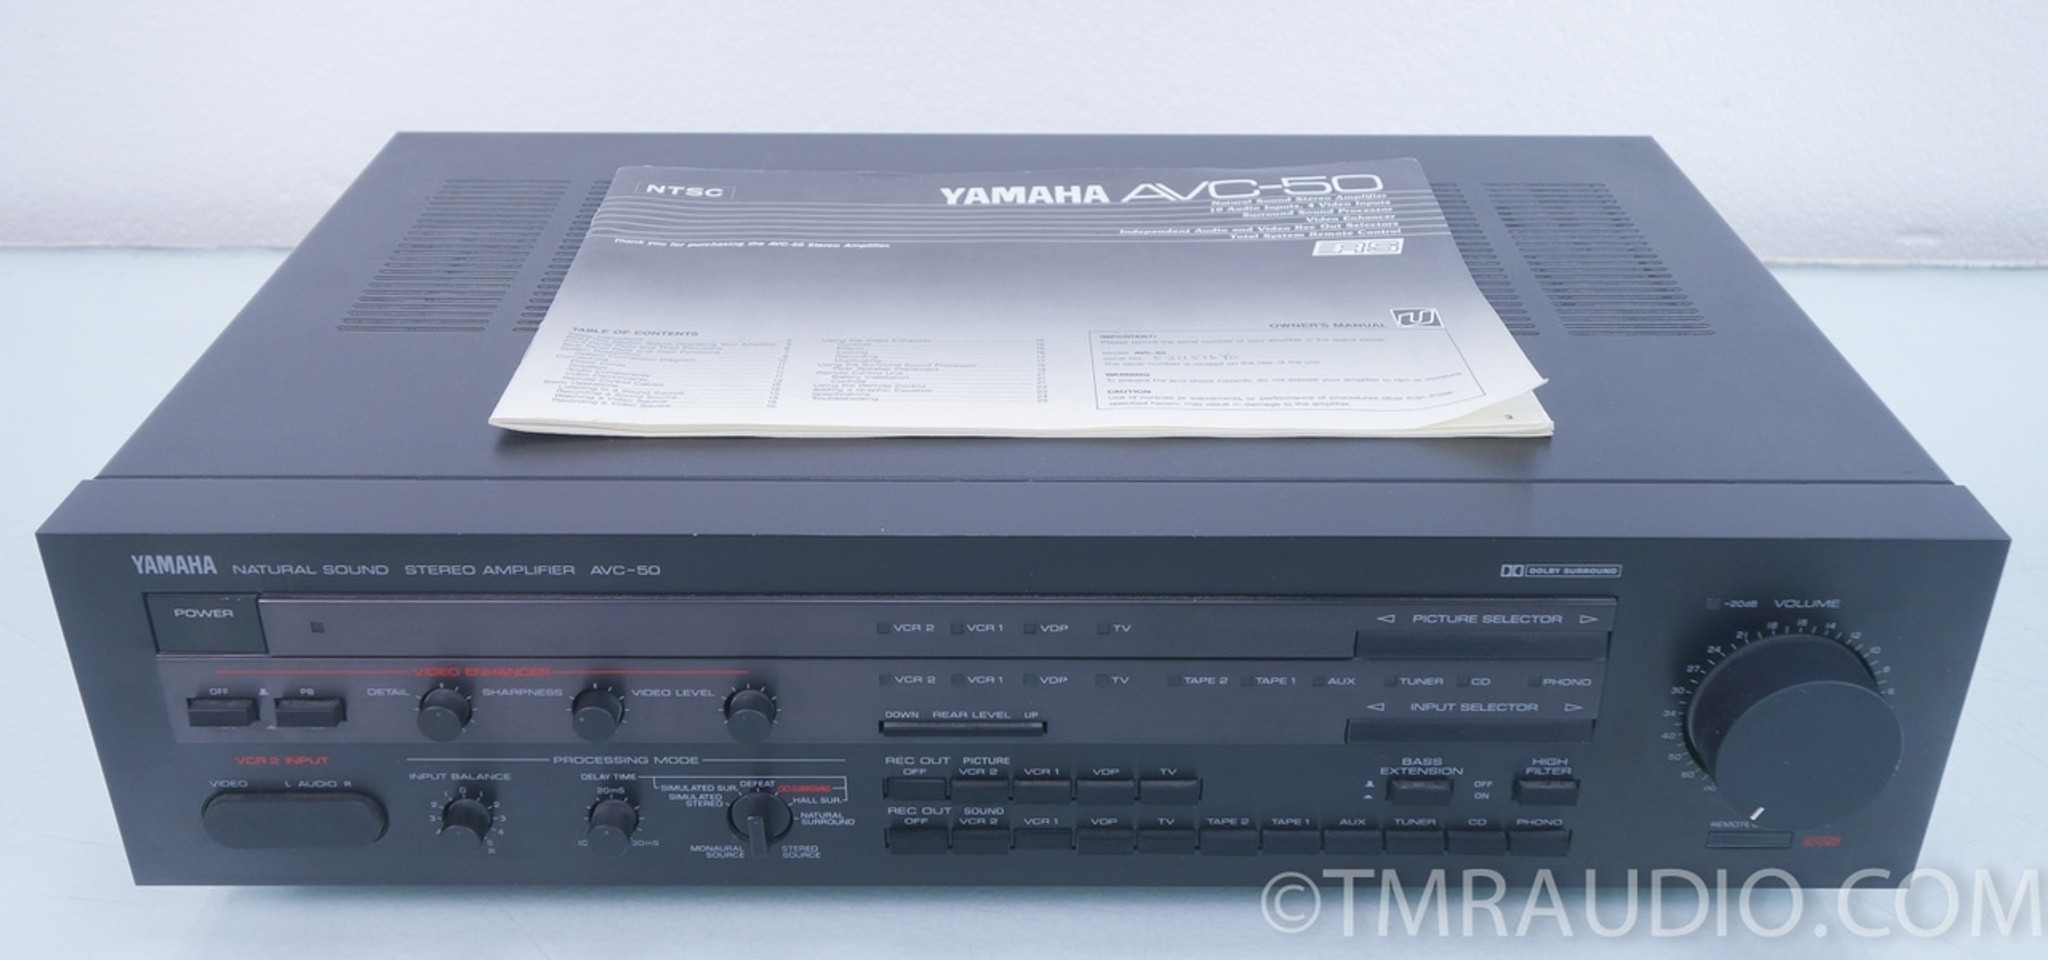 Yamaha AVC-50 Integrated Amplifier with Phono